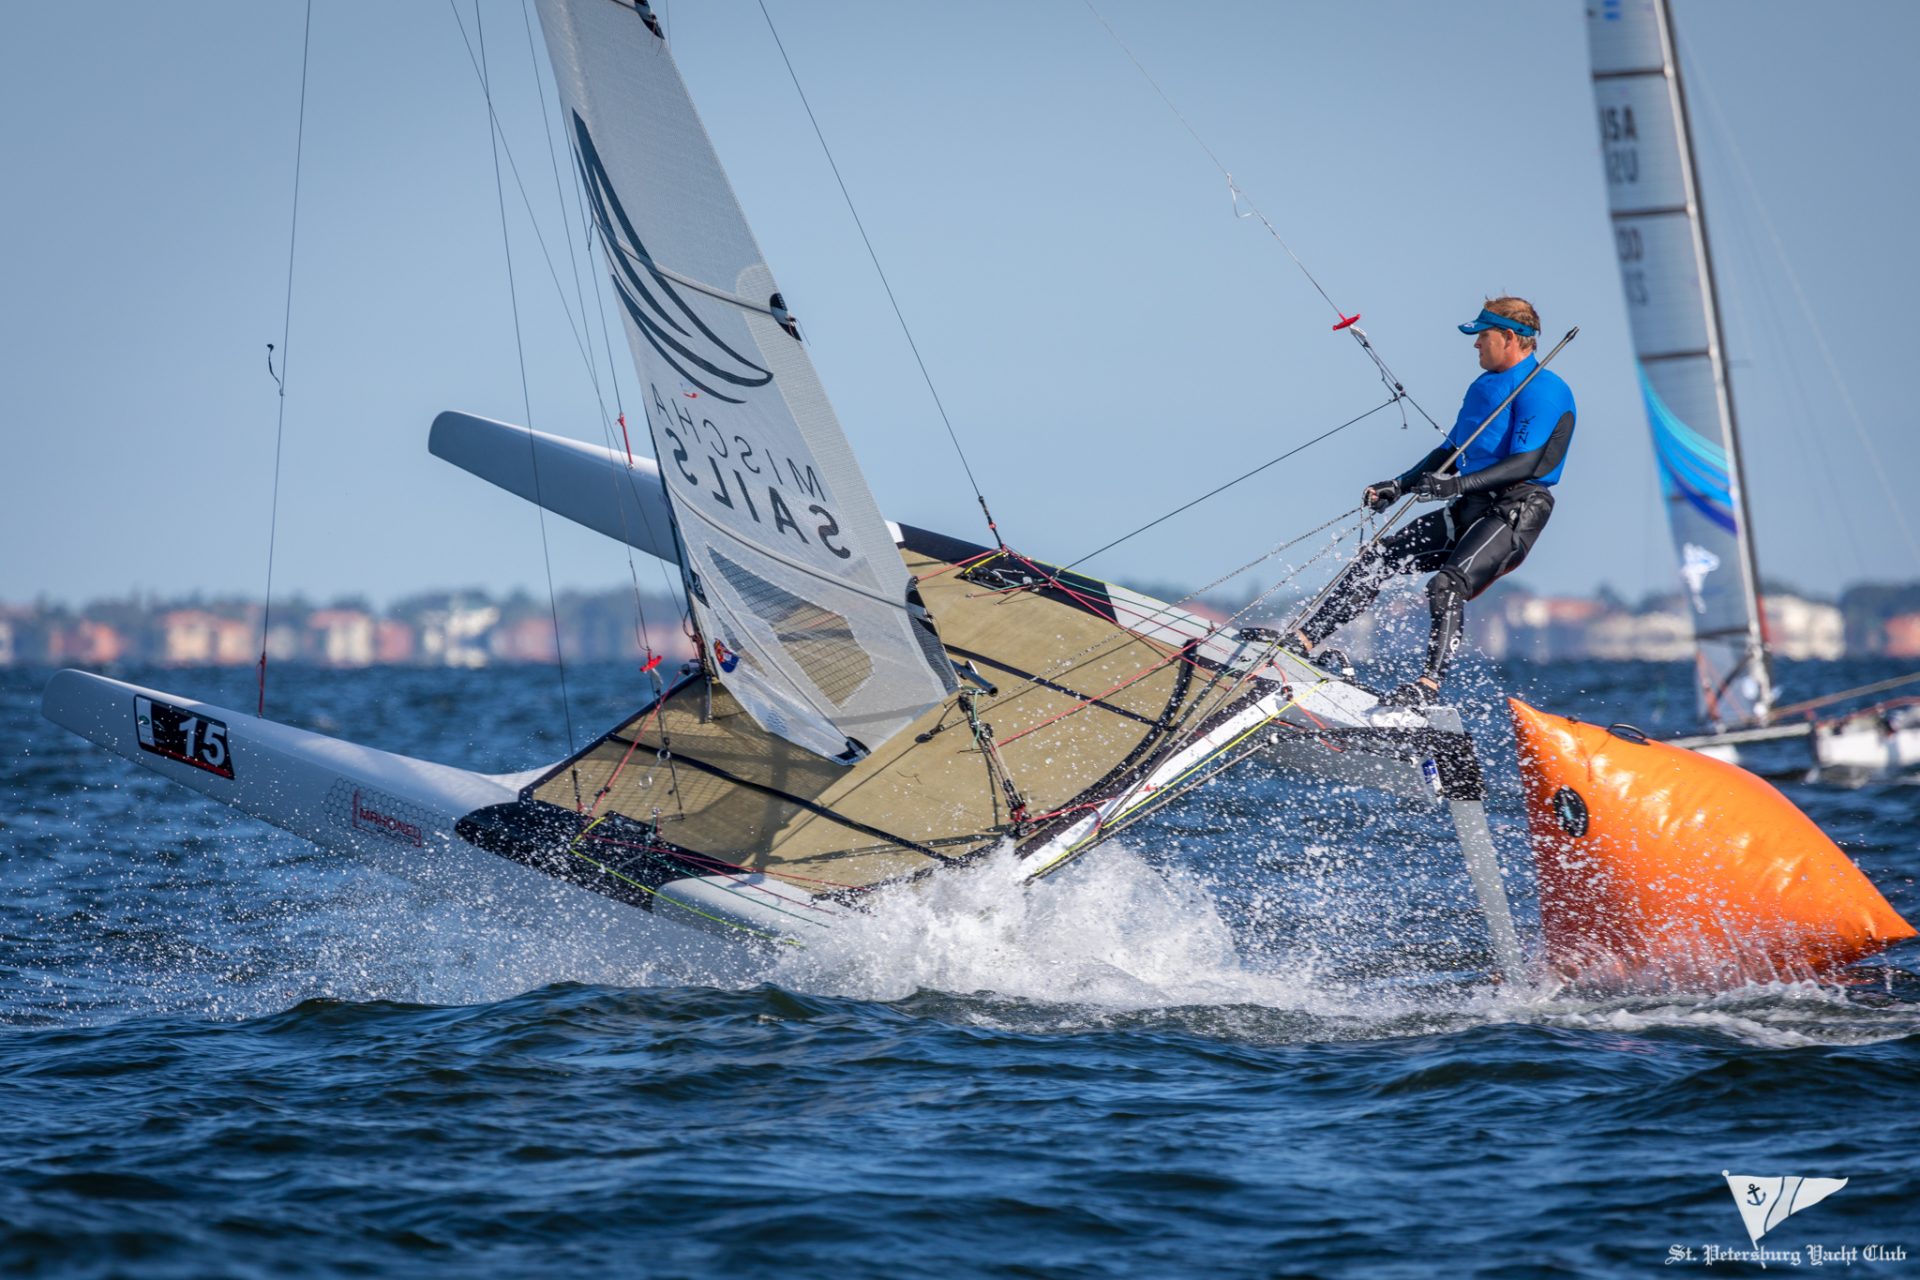  ACat  North American Championship 2019  St.Petersburg FL, USA  Final results  Heemskerk NED Foilers and Curry USA Classics grasp titles